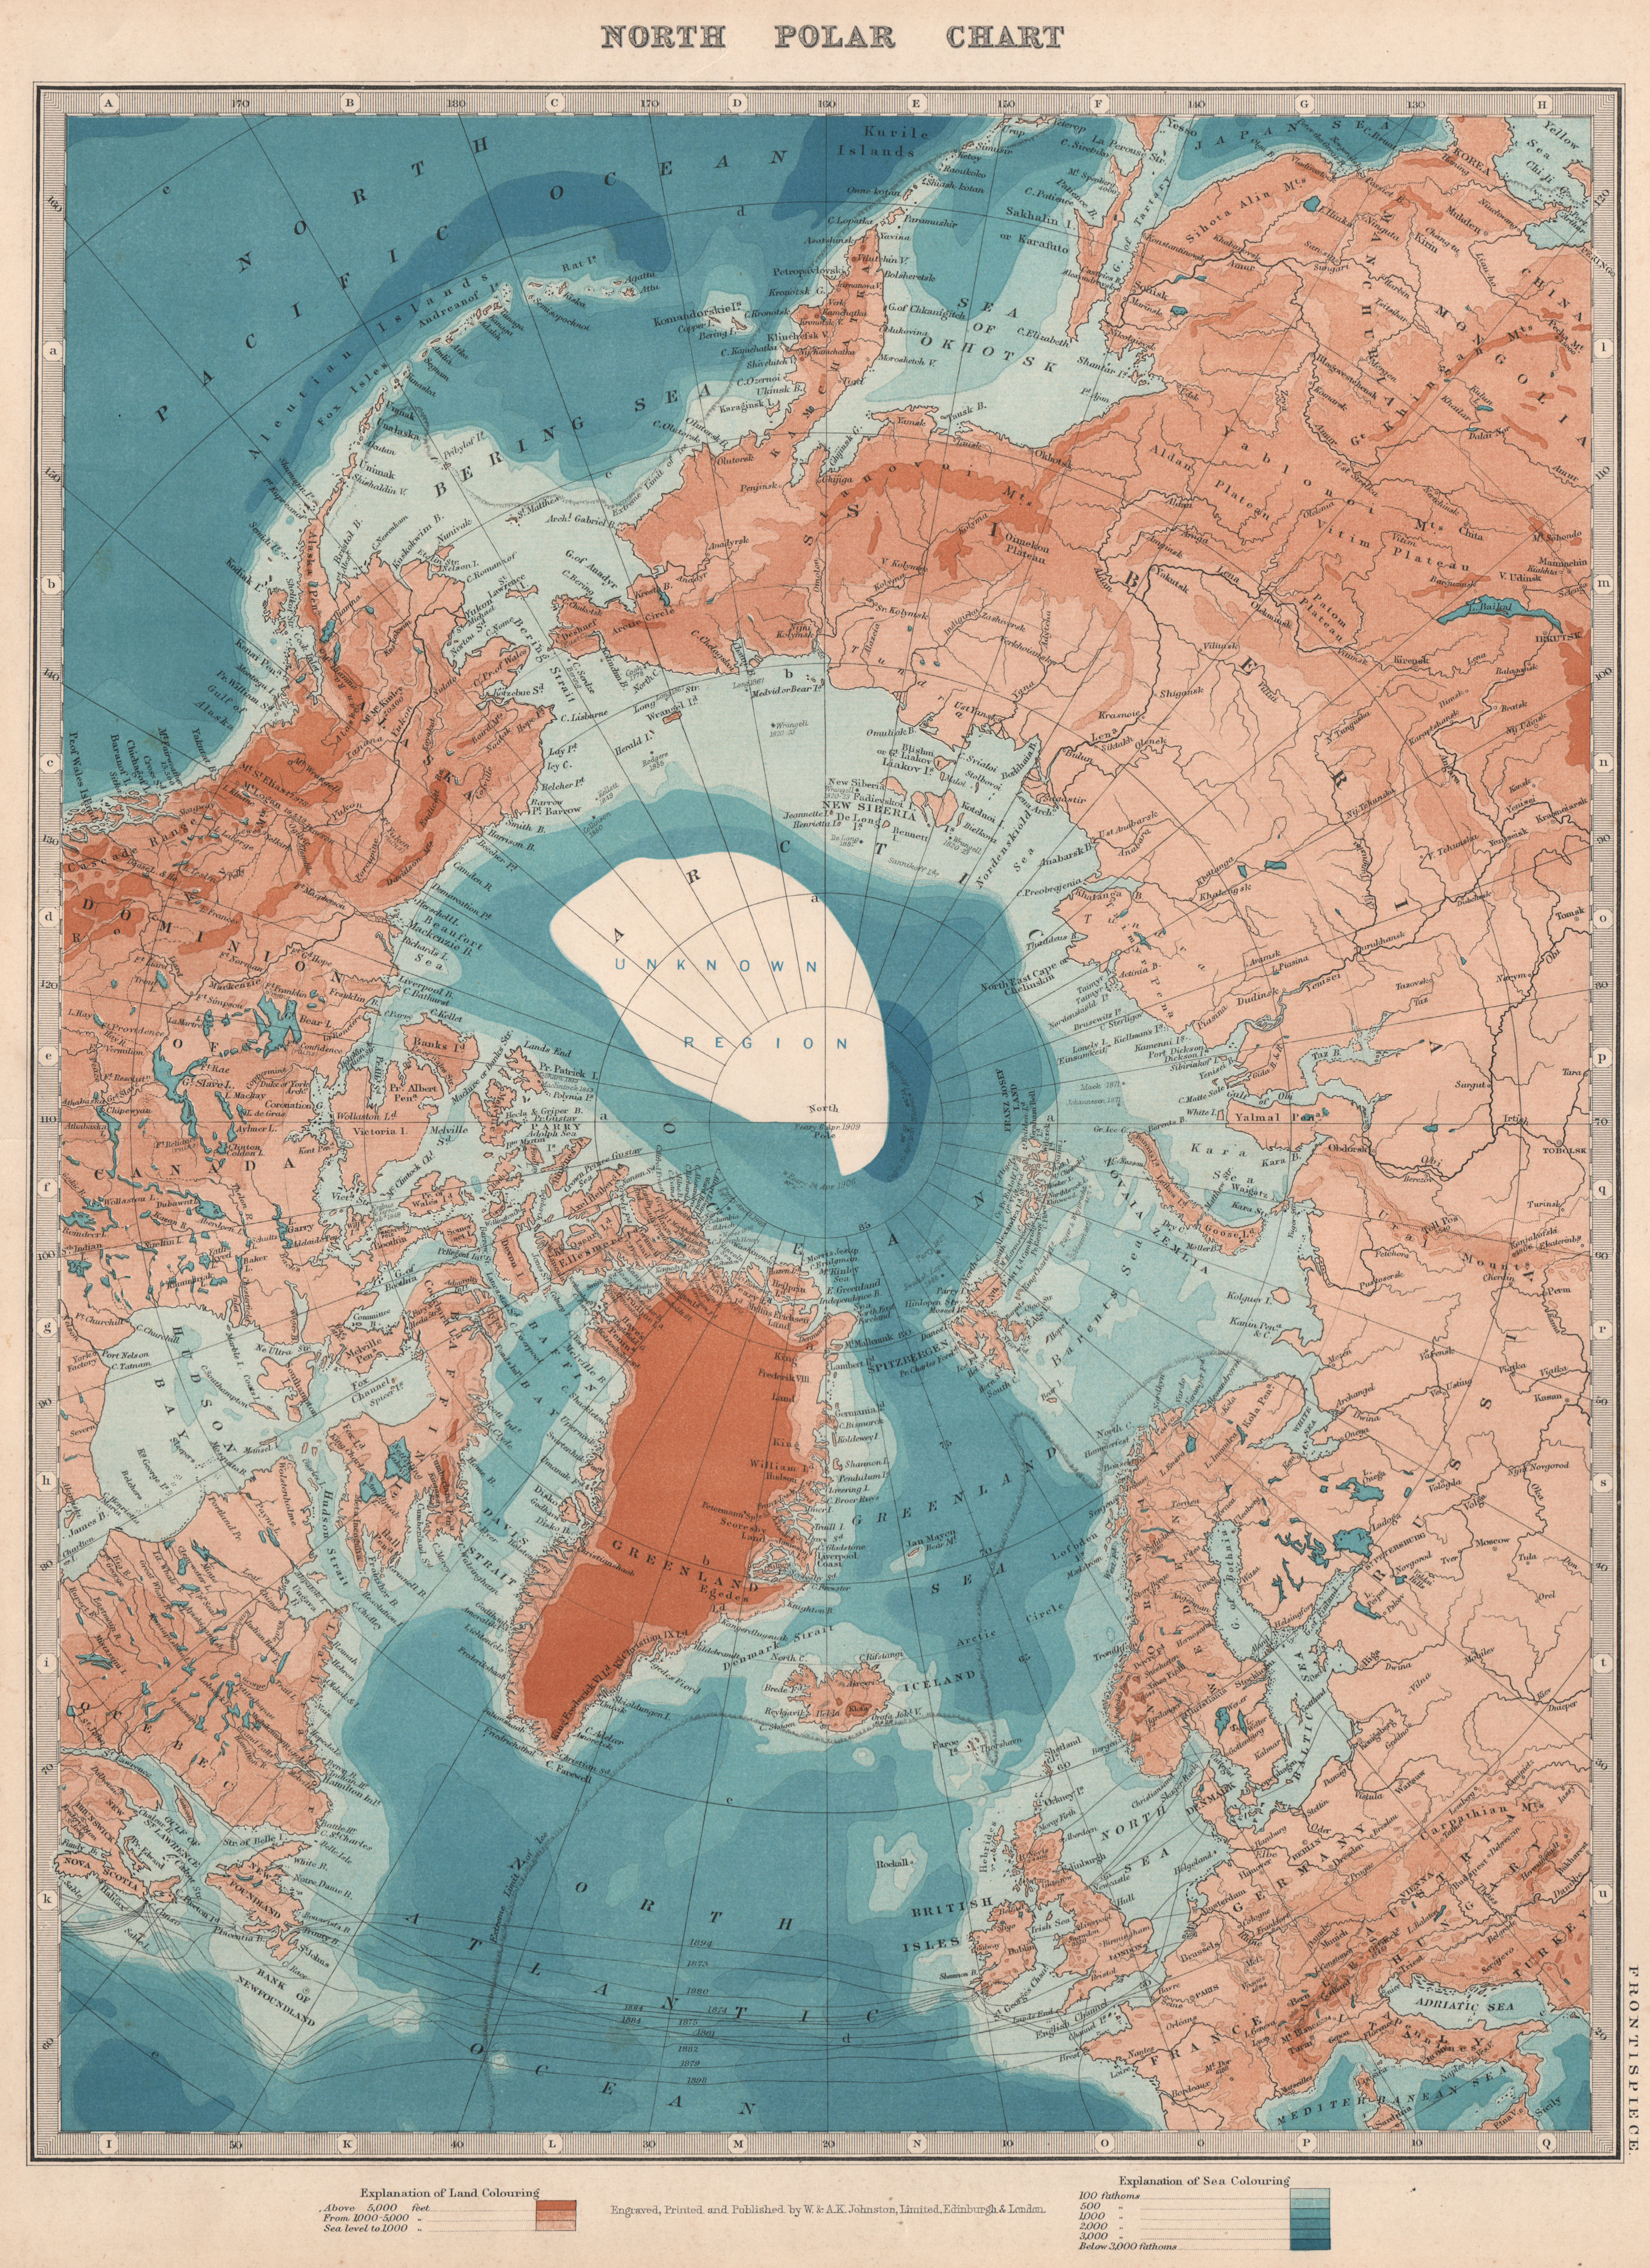 Associate Product ARCTIC. Show's Peary claim to have reached North Pole. JOHNSTON 1912 old map